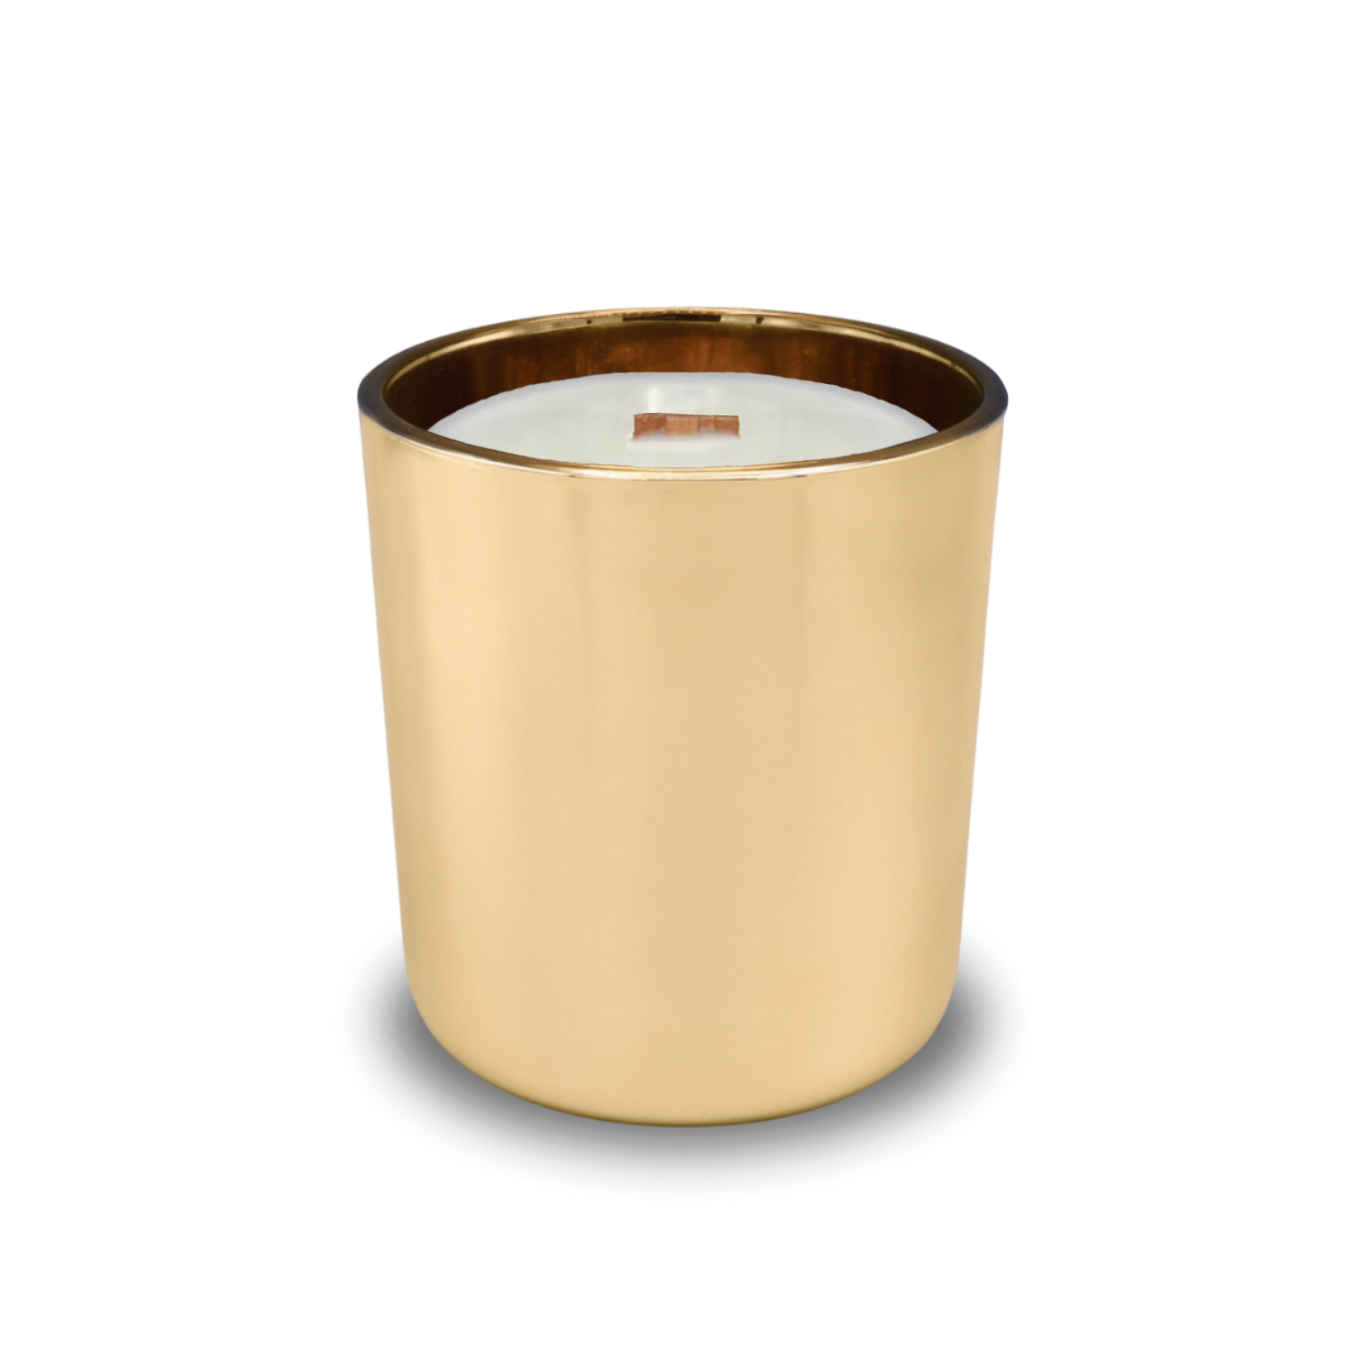 Halo - Glamour Gold w/ Wooden Wick & Lid (14oz)